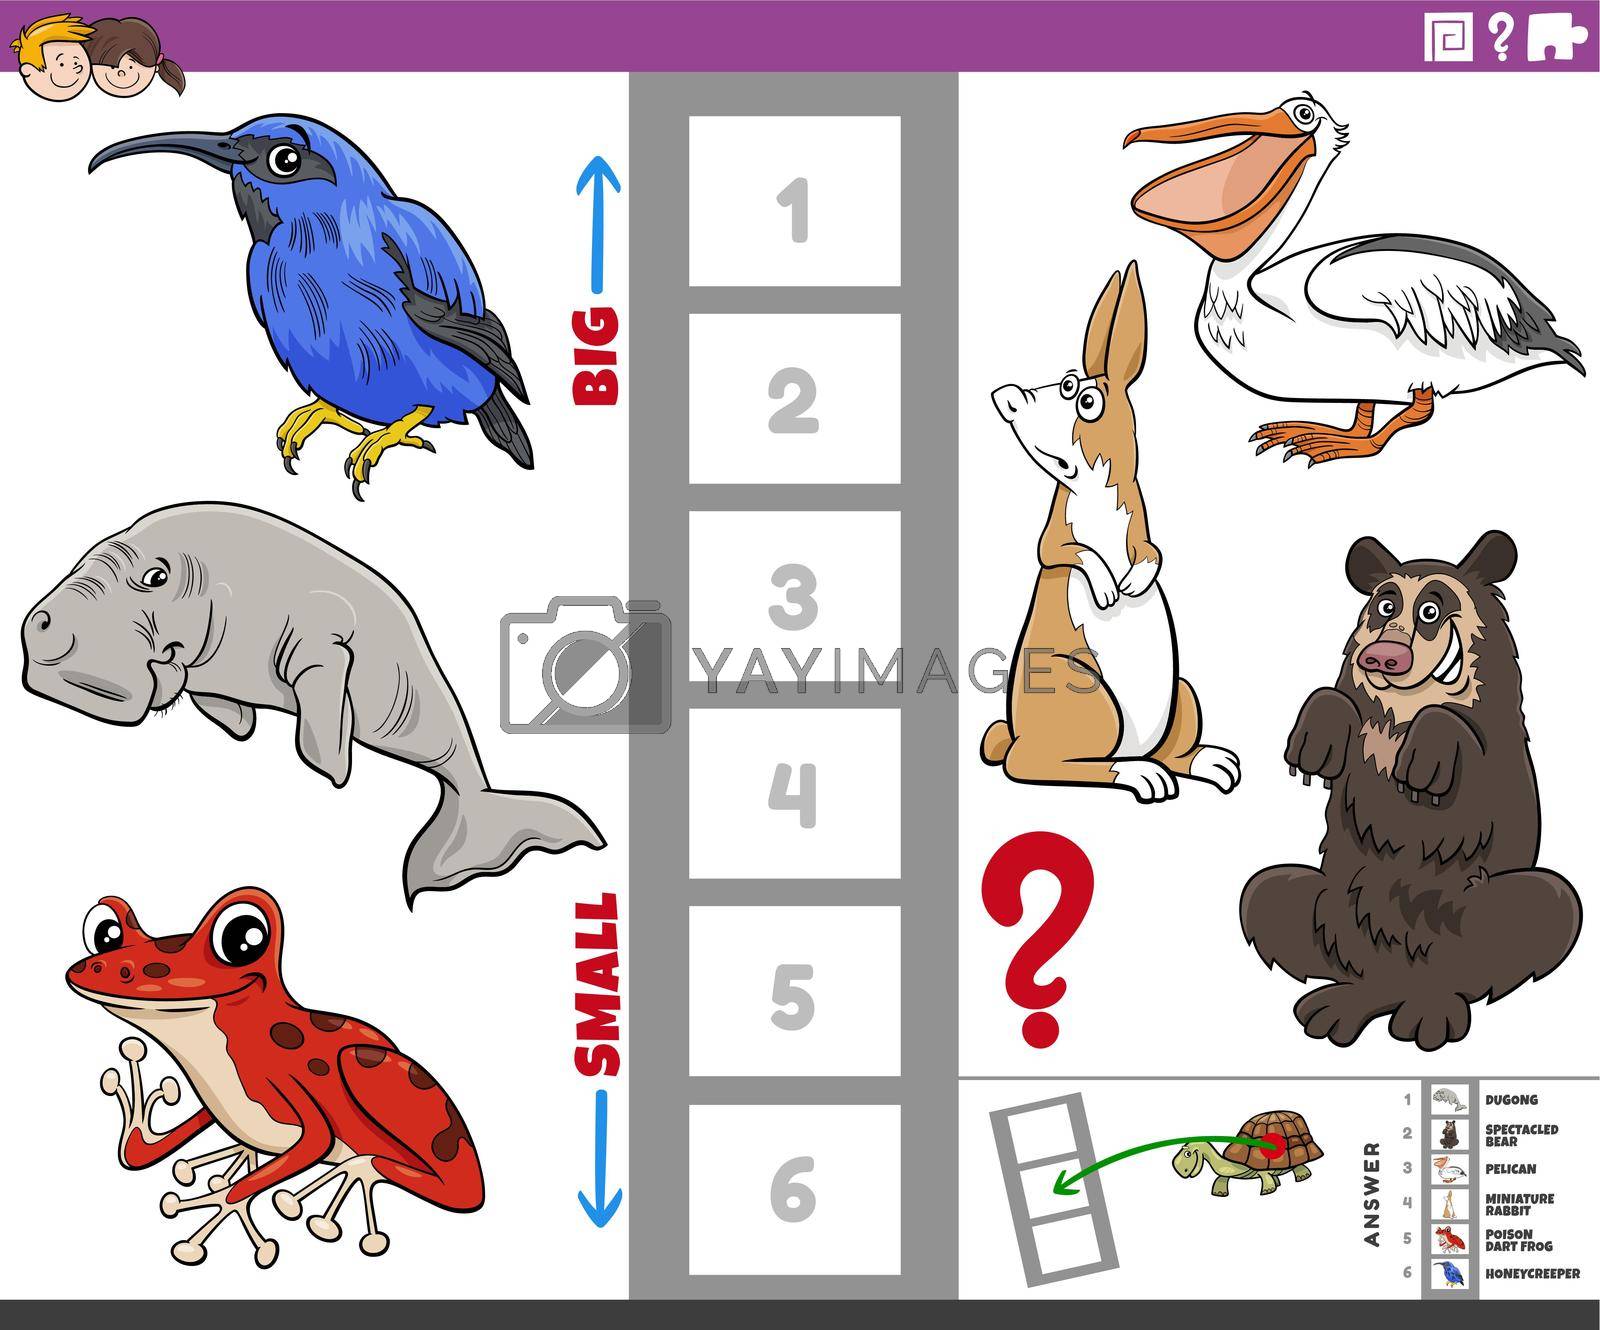 Cartoon illustration of educational game of finding the biggest and the smallest animal species